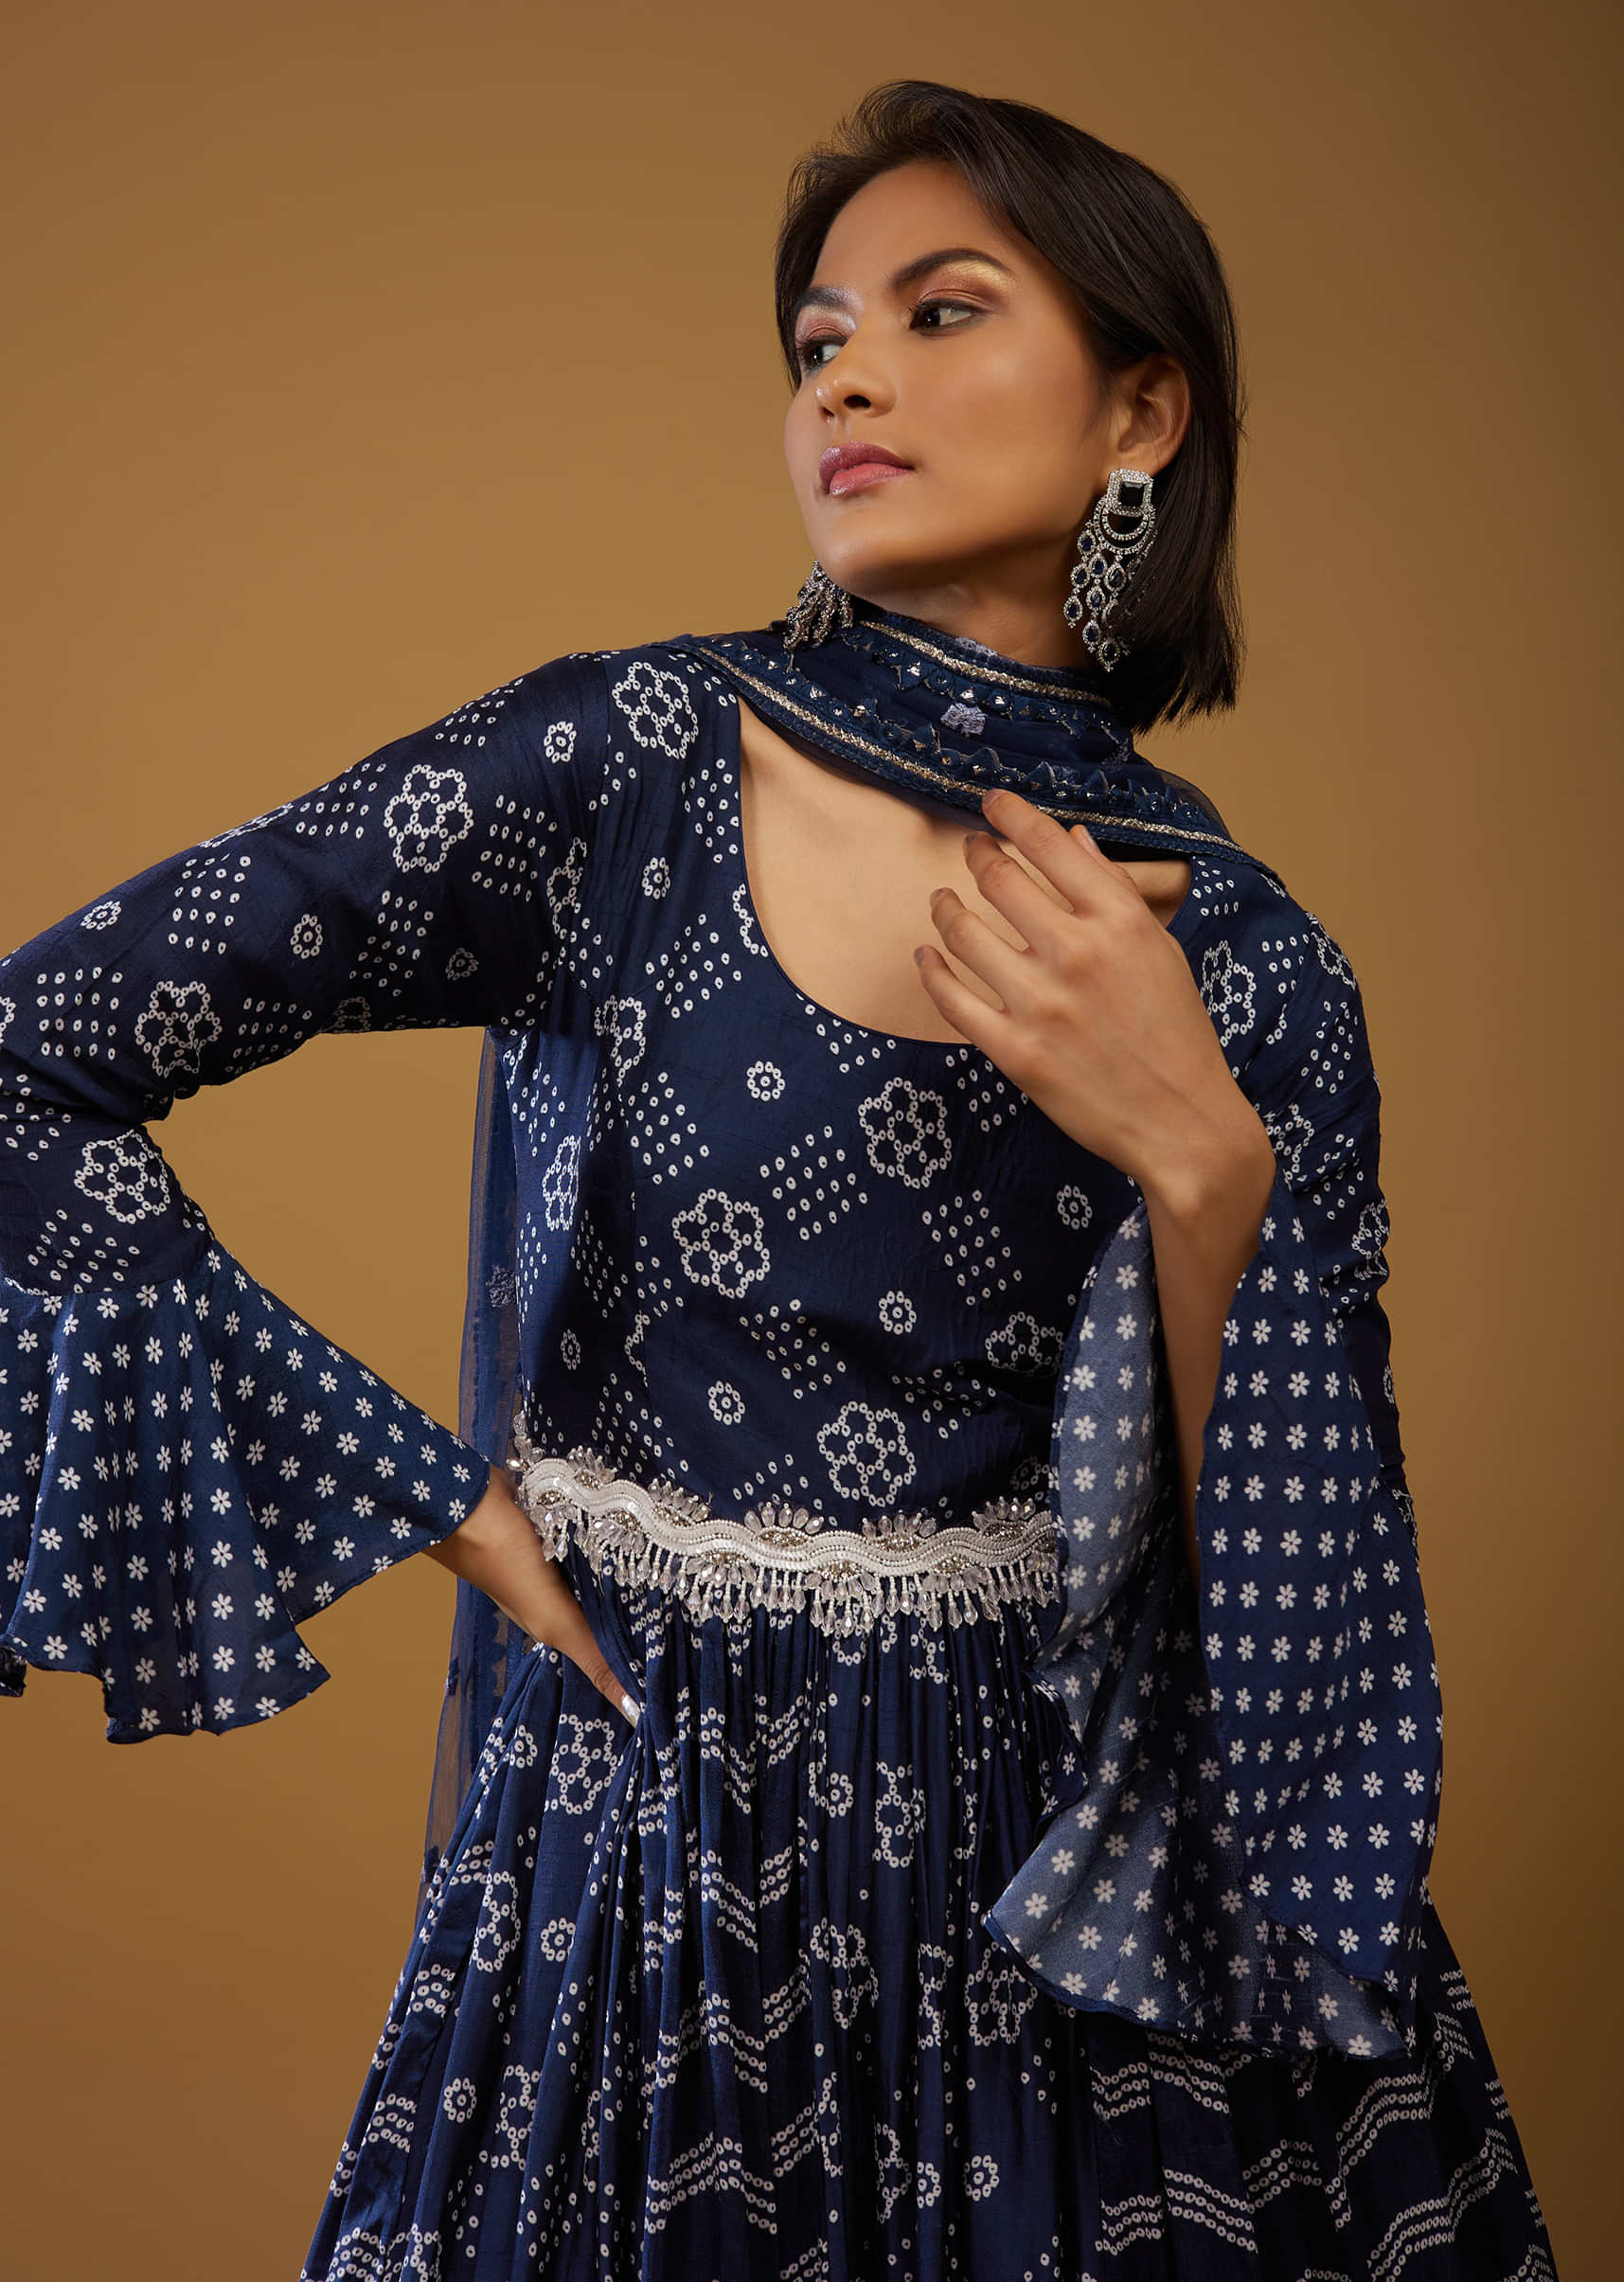 Persian Blue Anarkali Suit With Bandhani Print And Embroidery